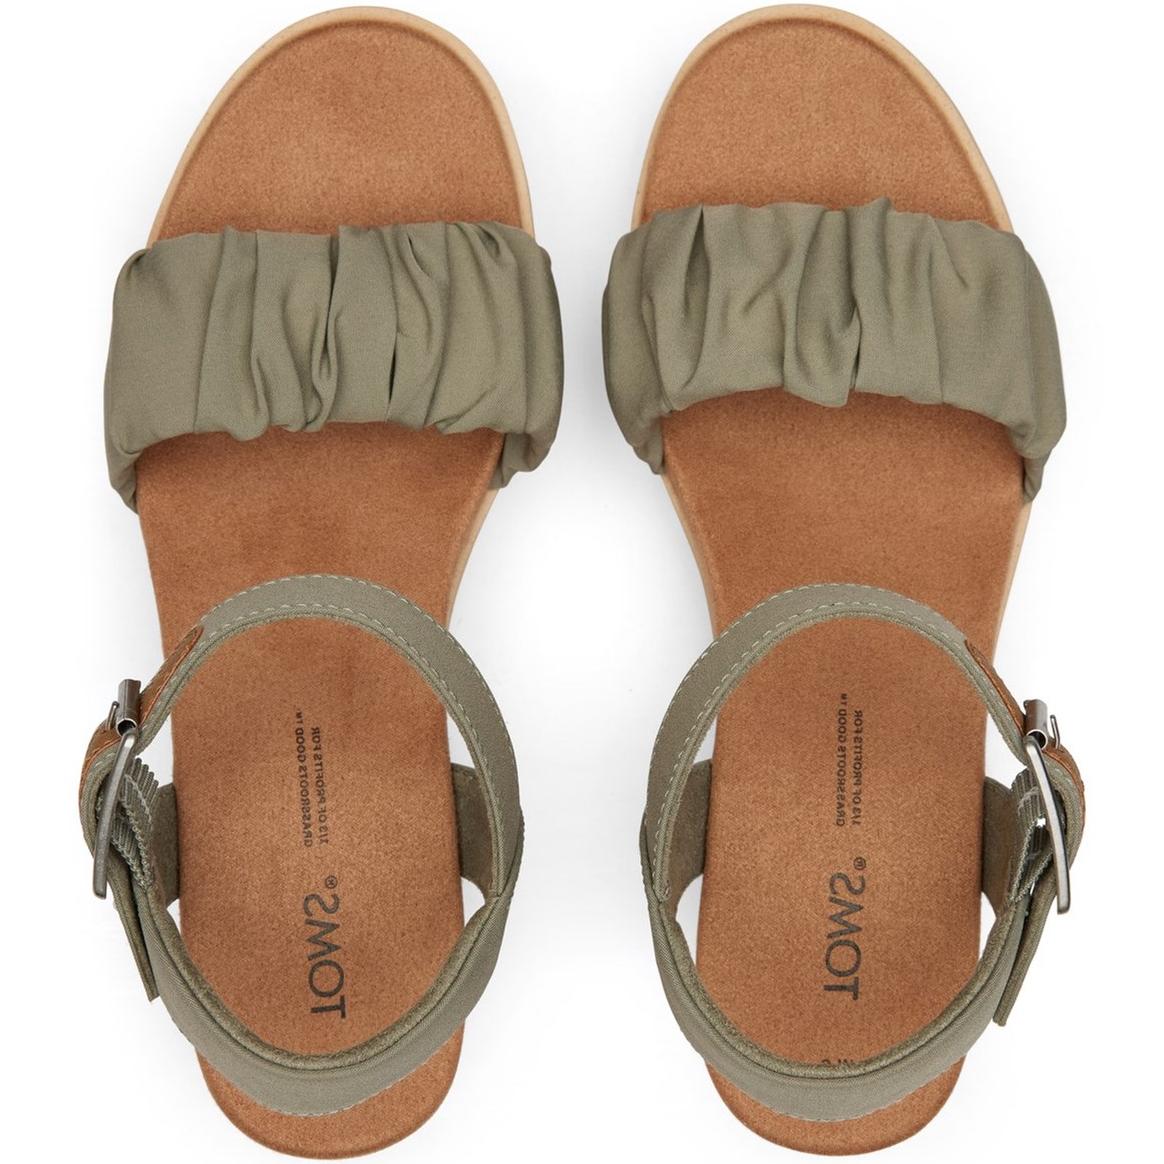 Toms Diana Wedge Sandals